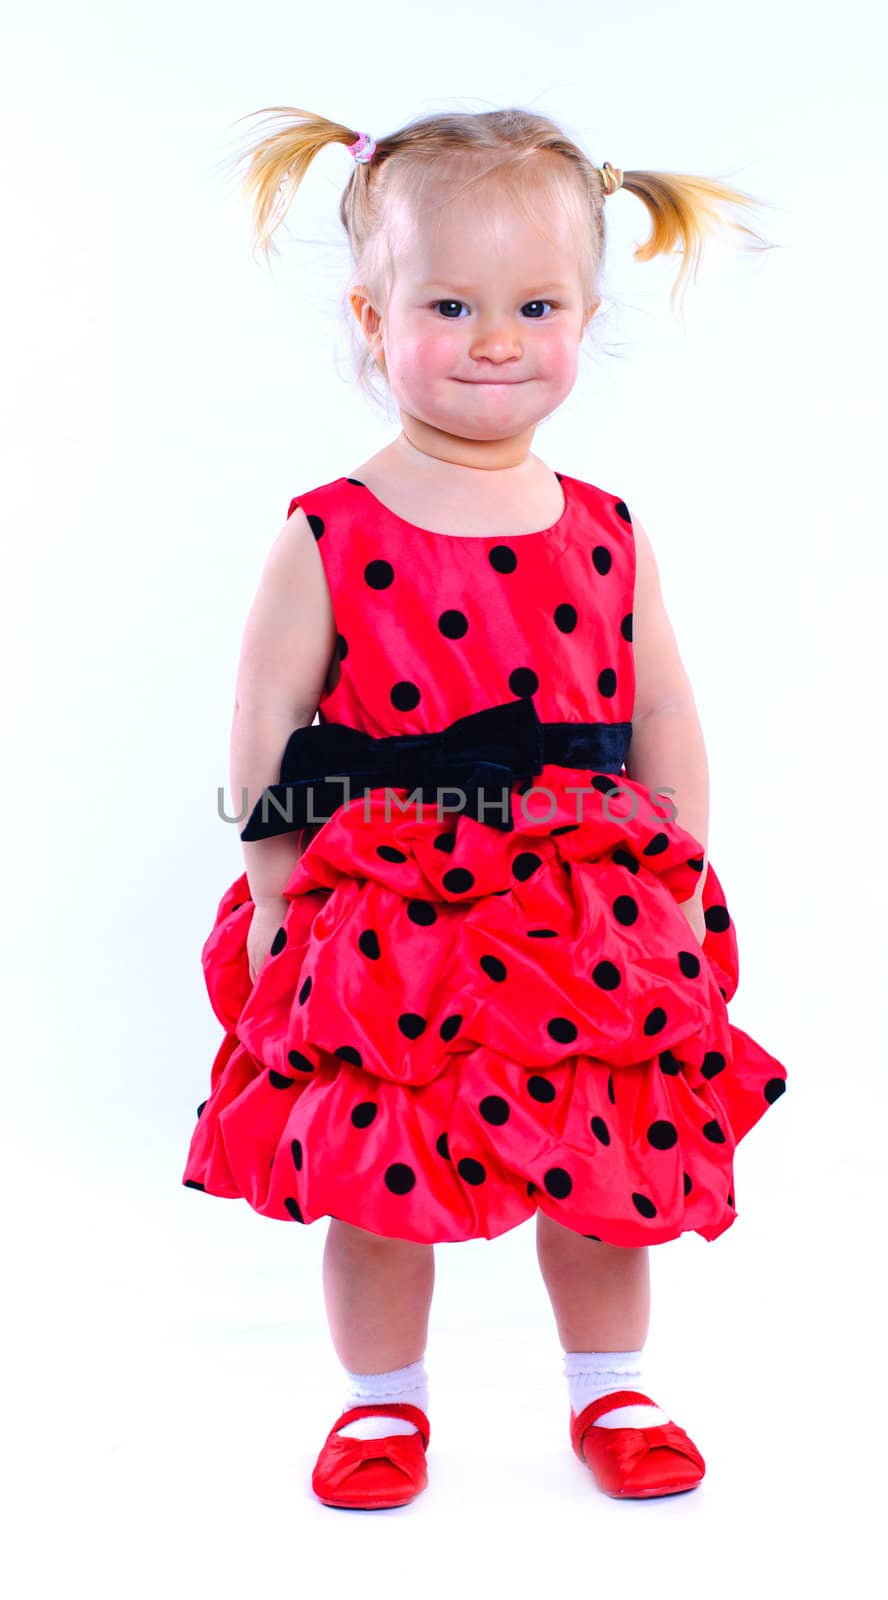 Cute little baby girl in a red dress. In the studio. Isolated